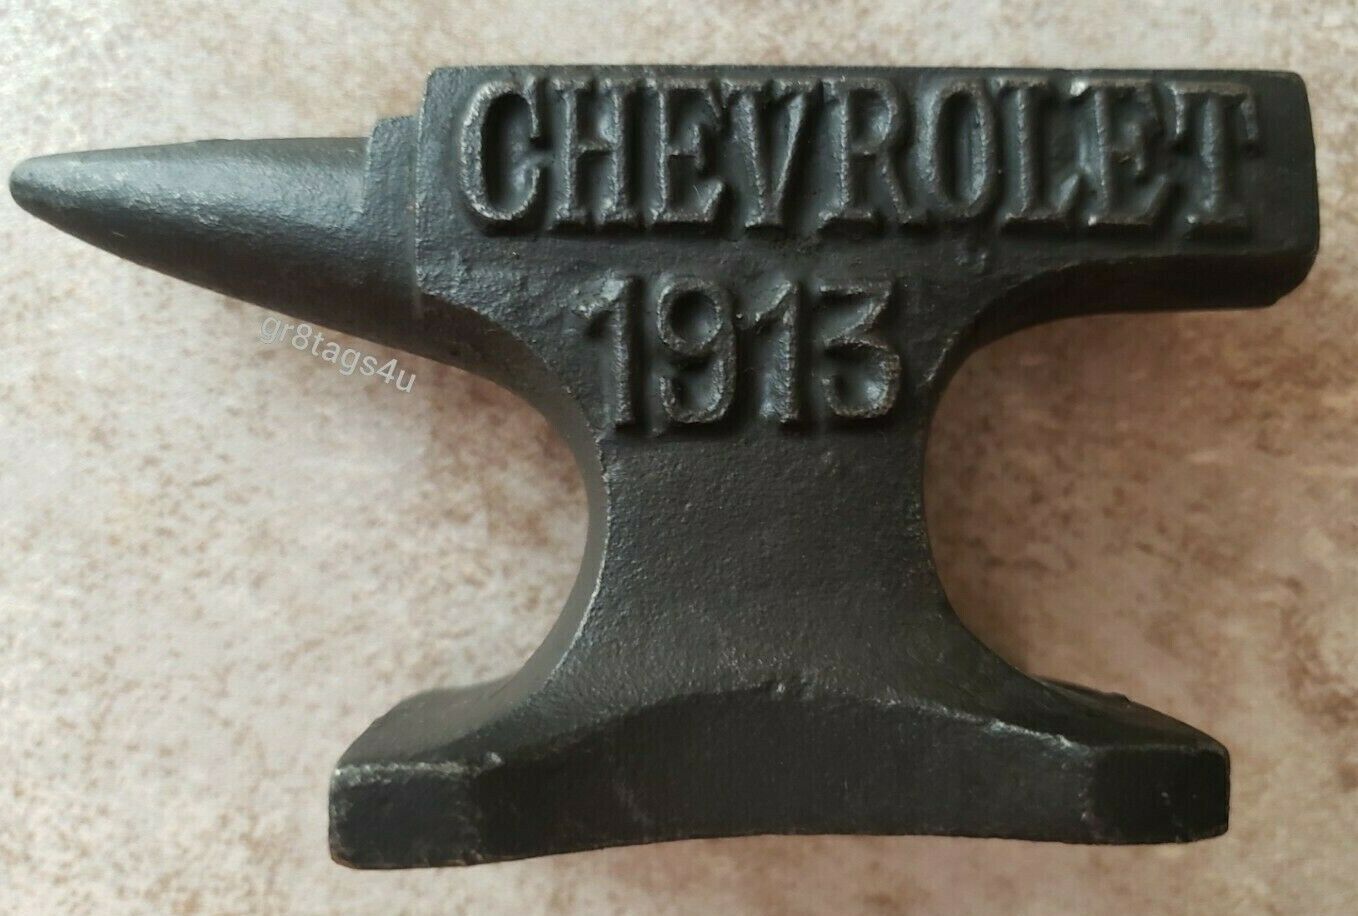 Chevrolet Tractor Rustic Cast Iron Anvil Jewelry Paperweight Hobby